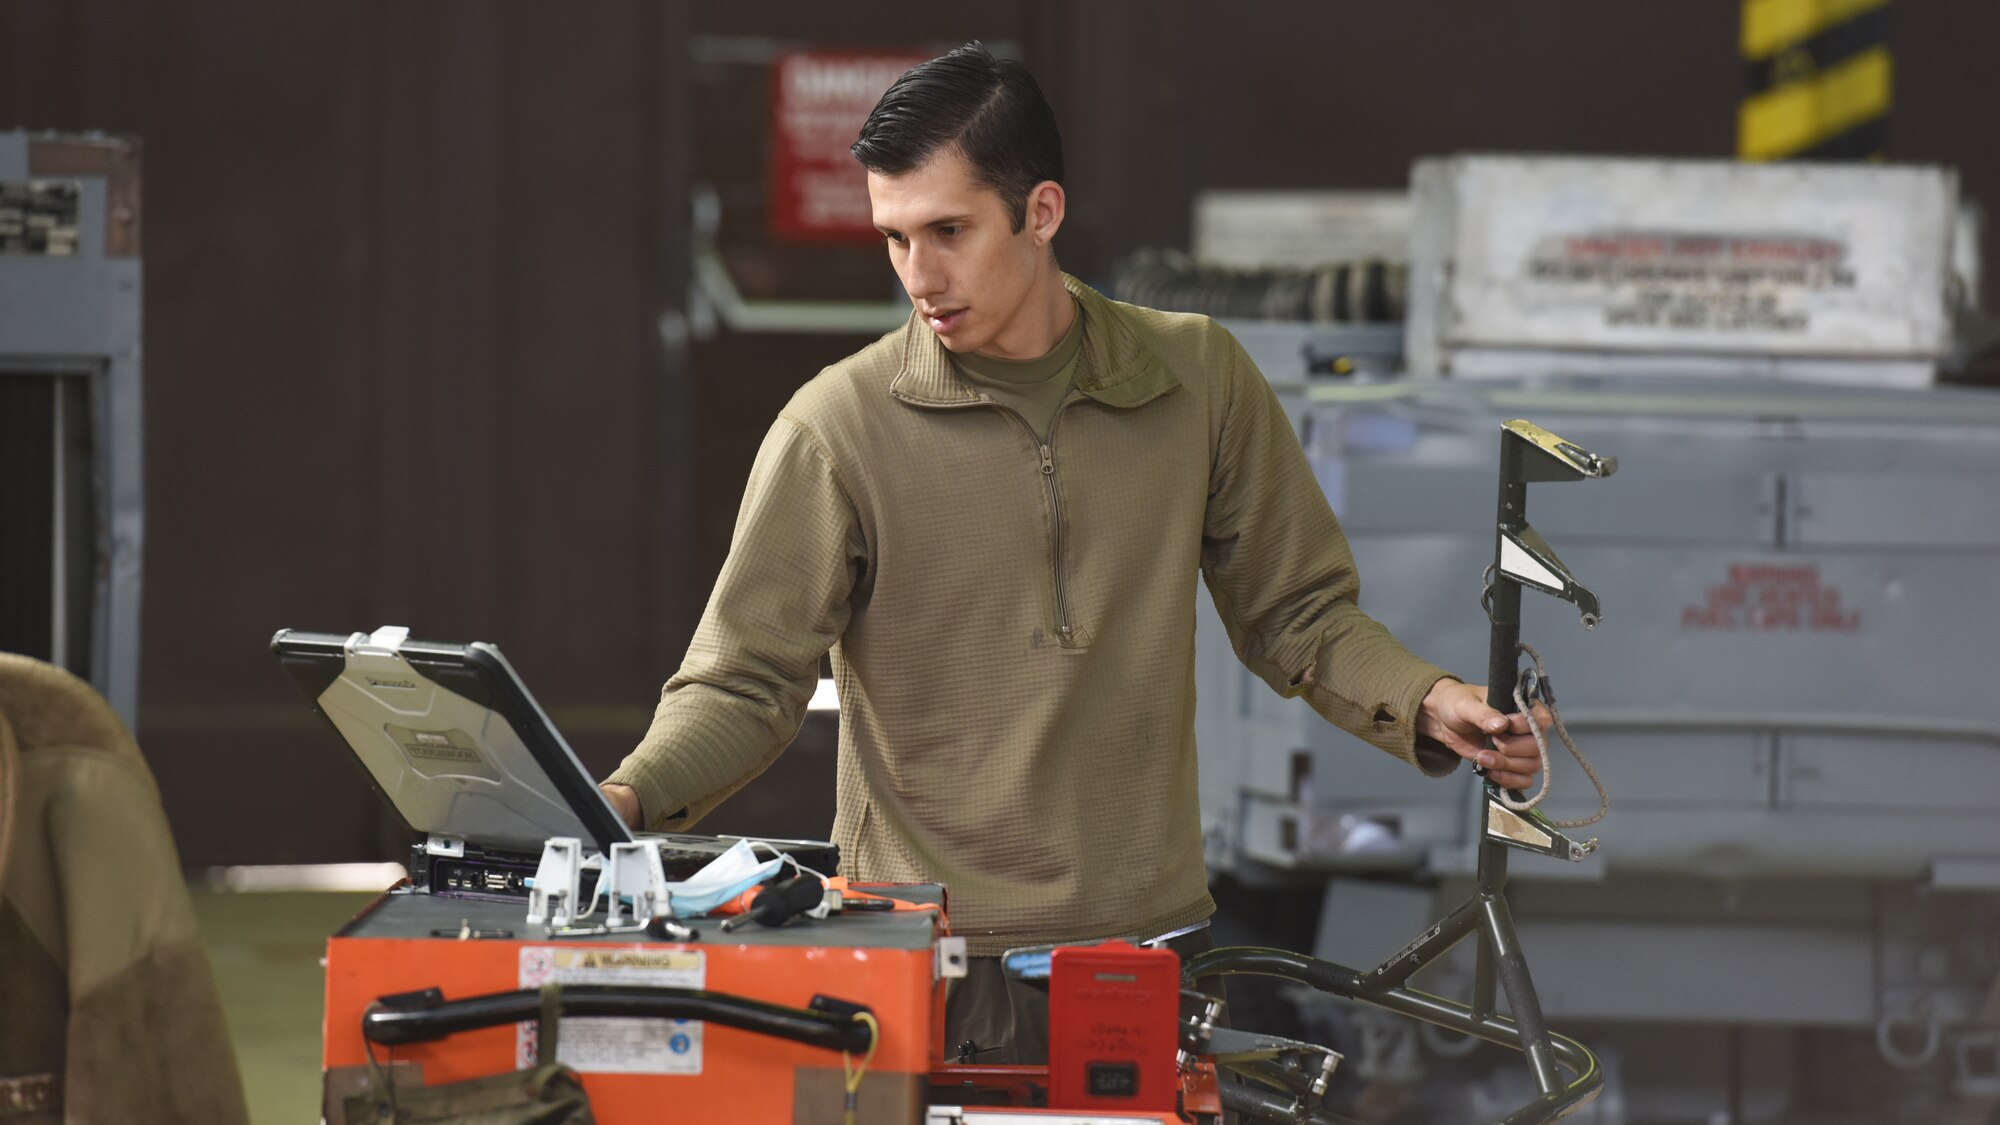 U.S. Air Force Staff Sgt. Patrick Montoya, 52nd Maintenance Squadron Aircraft Inspection Craftsman, reviews technical orders before working with a fire control radar antenna handling device during a radar replacement. The 52nd Maintenance Squadron Maintenance Flight won the 52nd Fighter Wing Flight Safety Award for the fourth quarter of 2020 and also for the first quarter of 2021. (U.S. Air Force photo by Tech. Sgt. Tony Plyler)